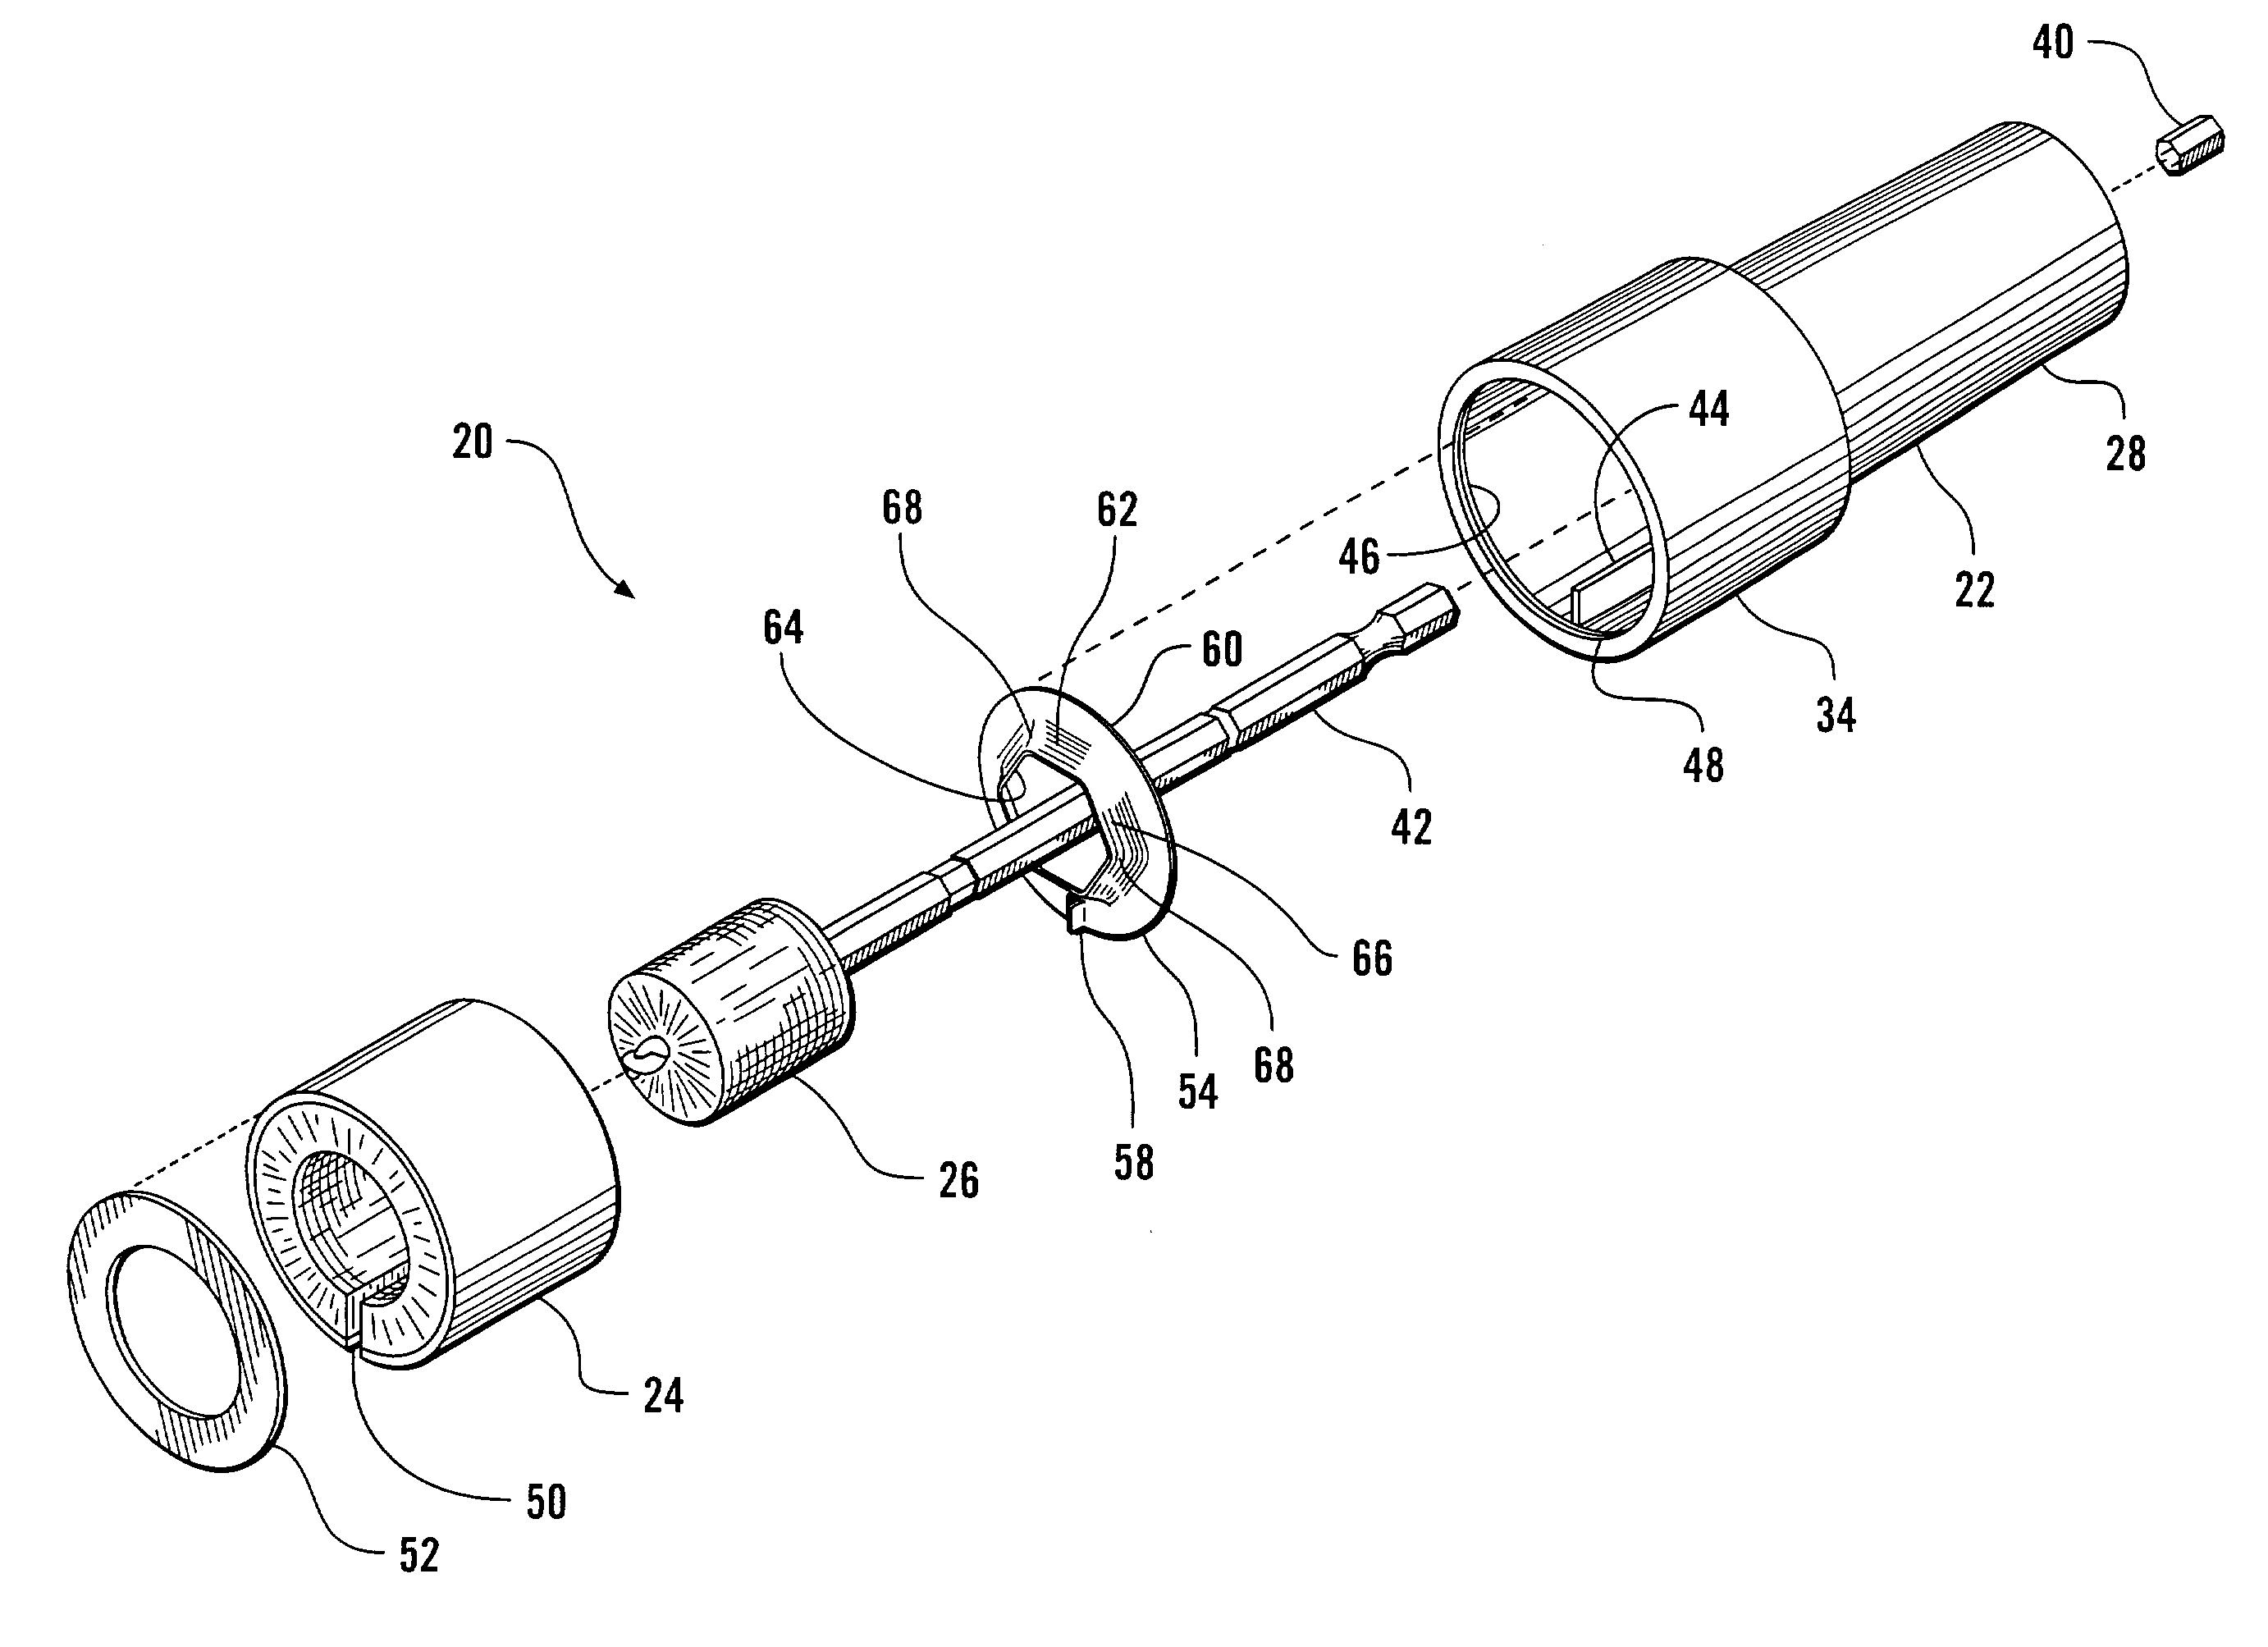 Pipe cleaning and deburring tool